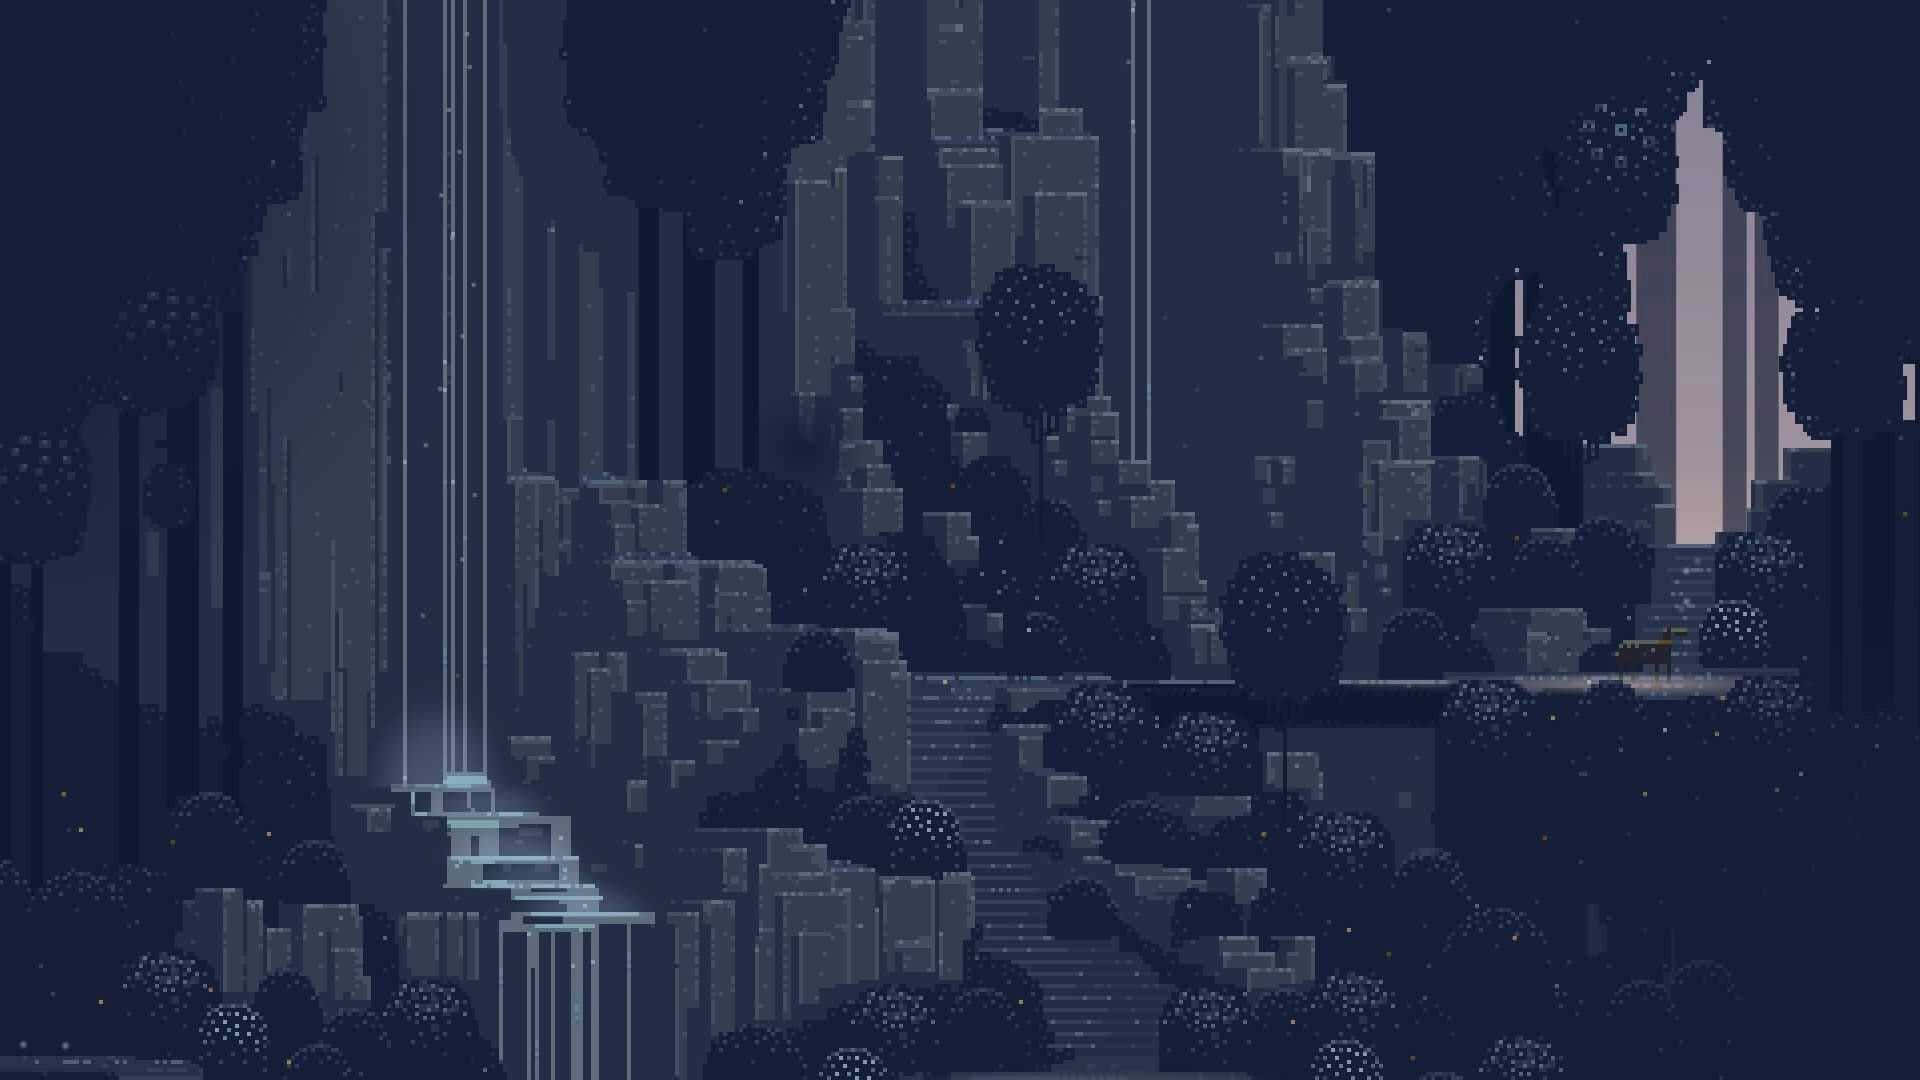 Enjoy the sights of the city in pixel art Wallpaper